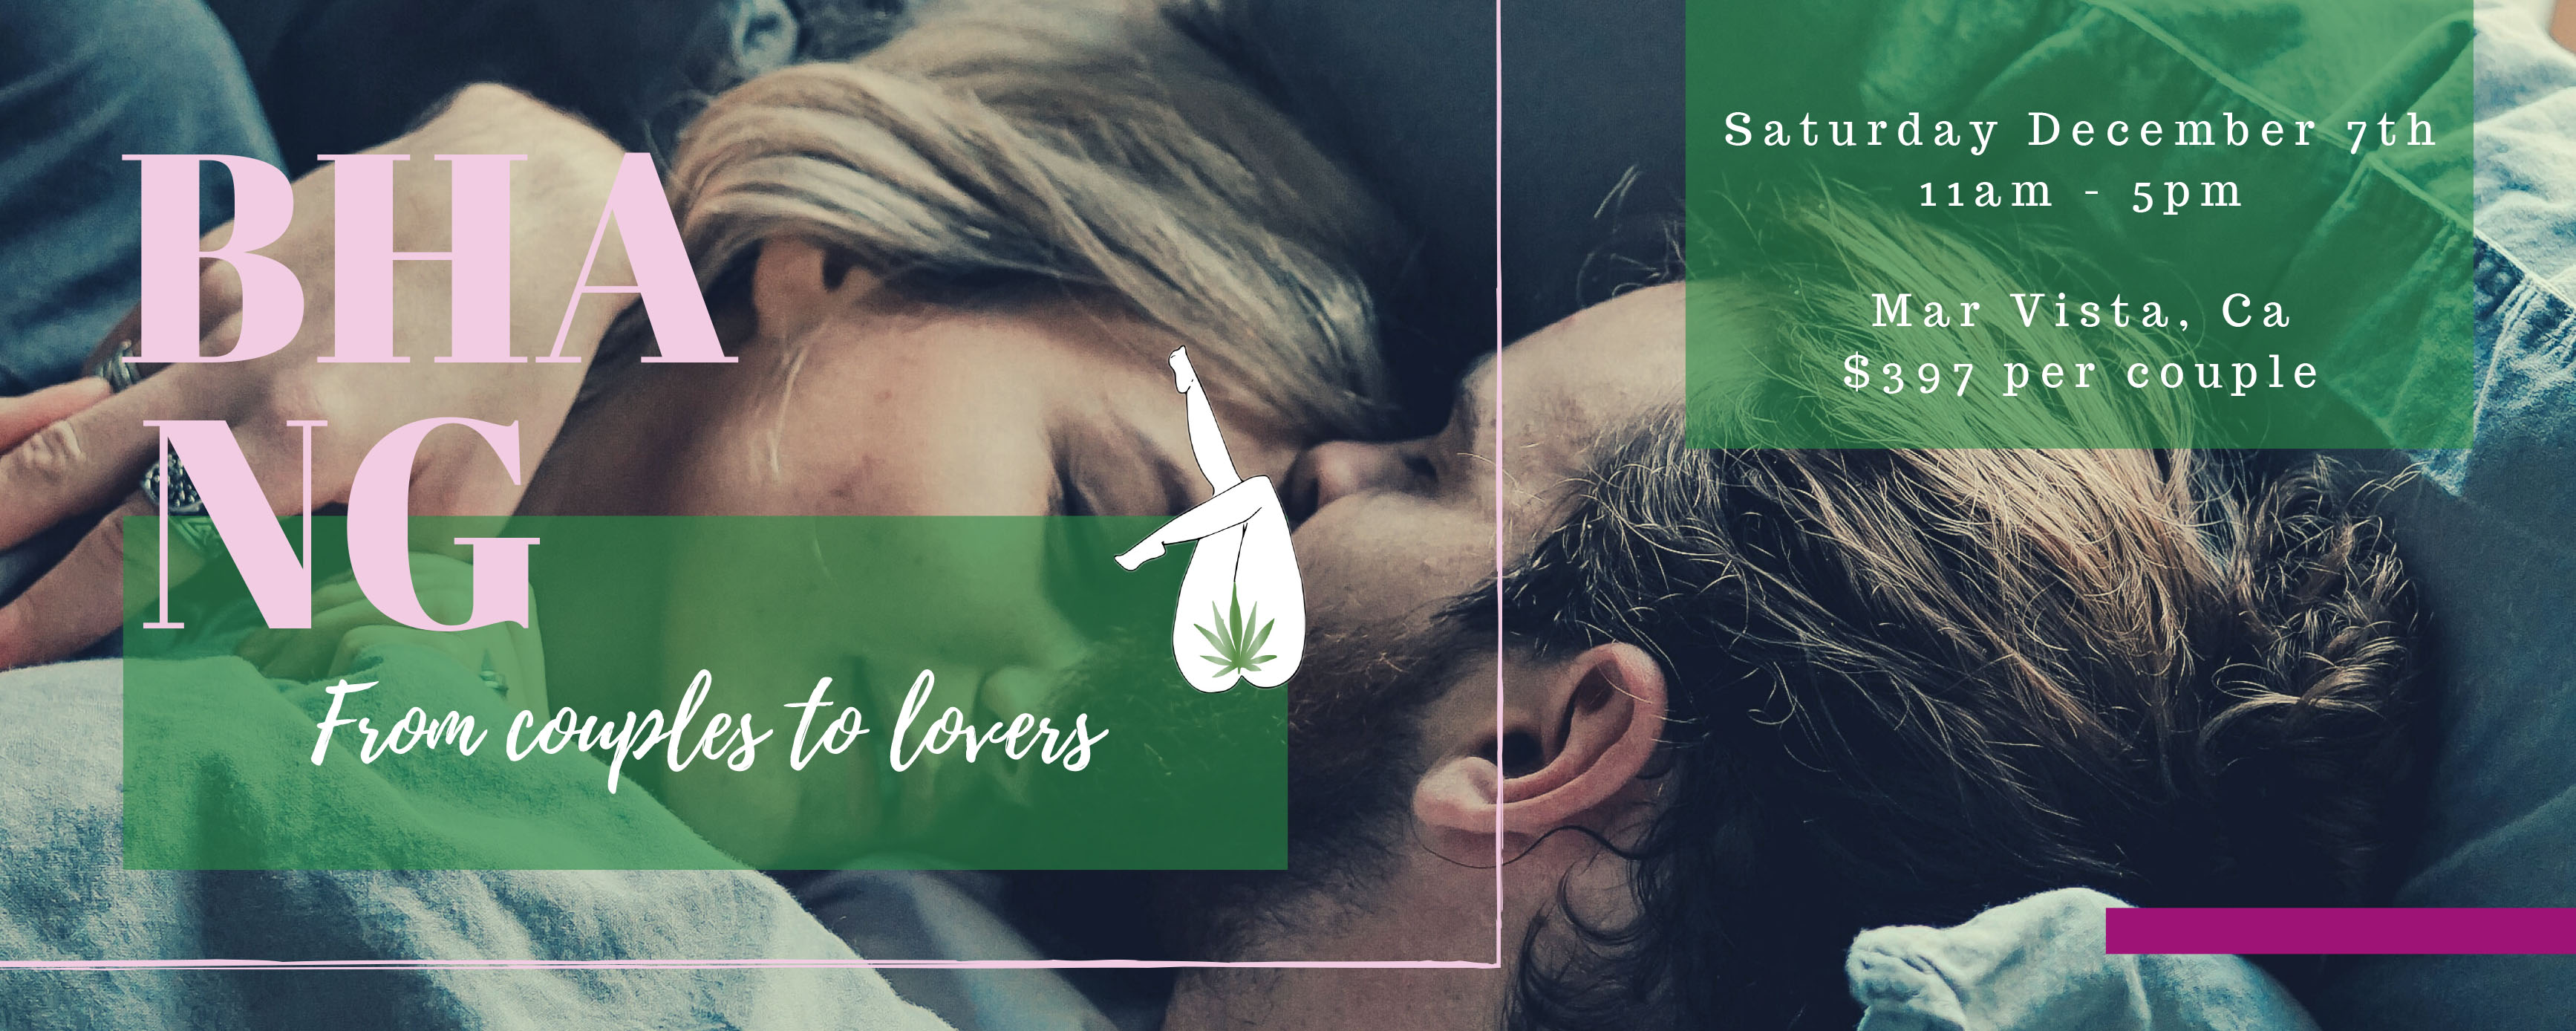 Bhang: From Couples to Lovers